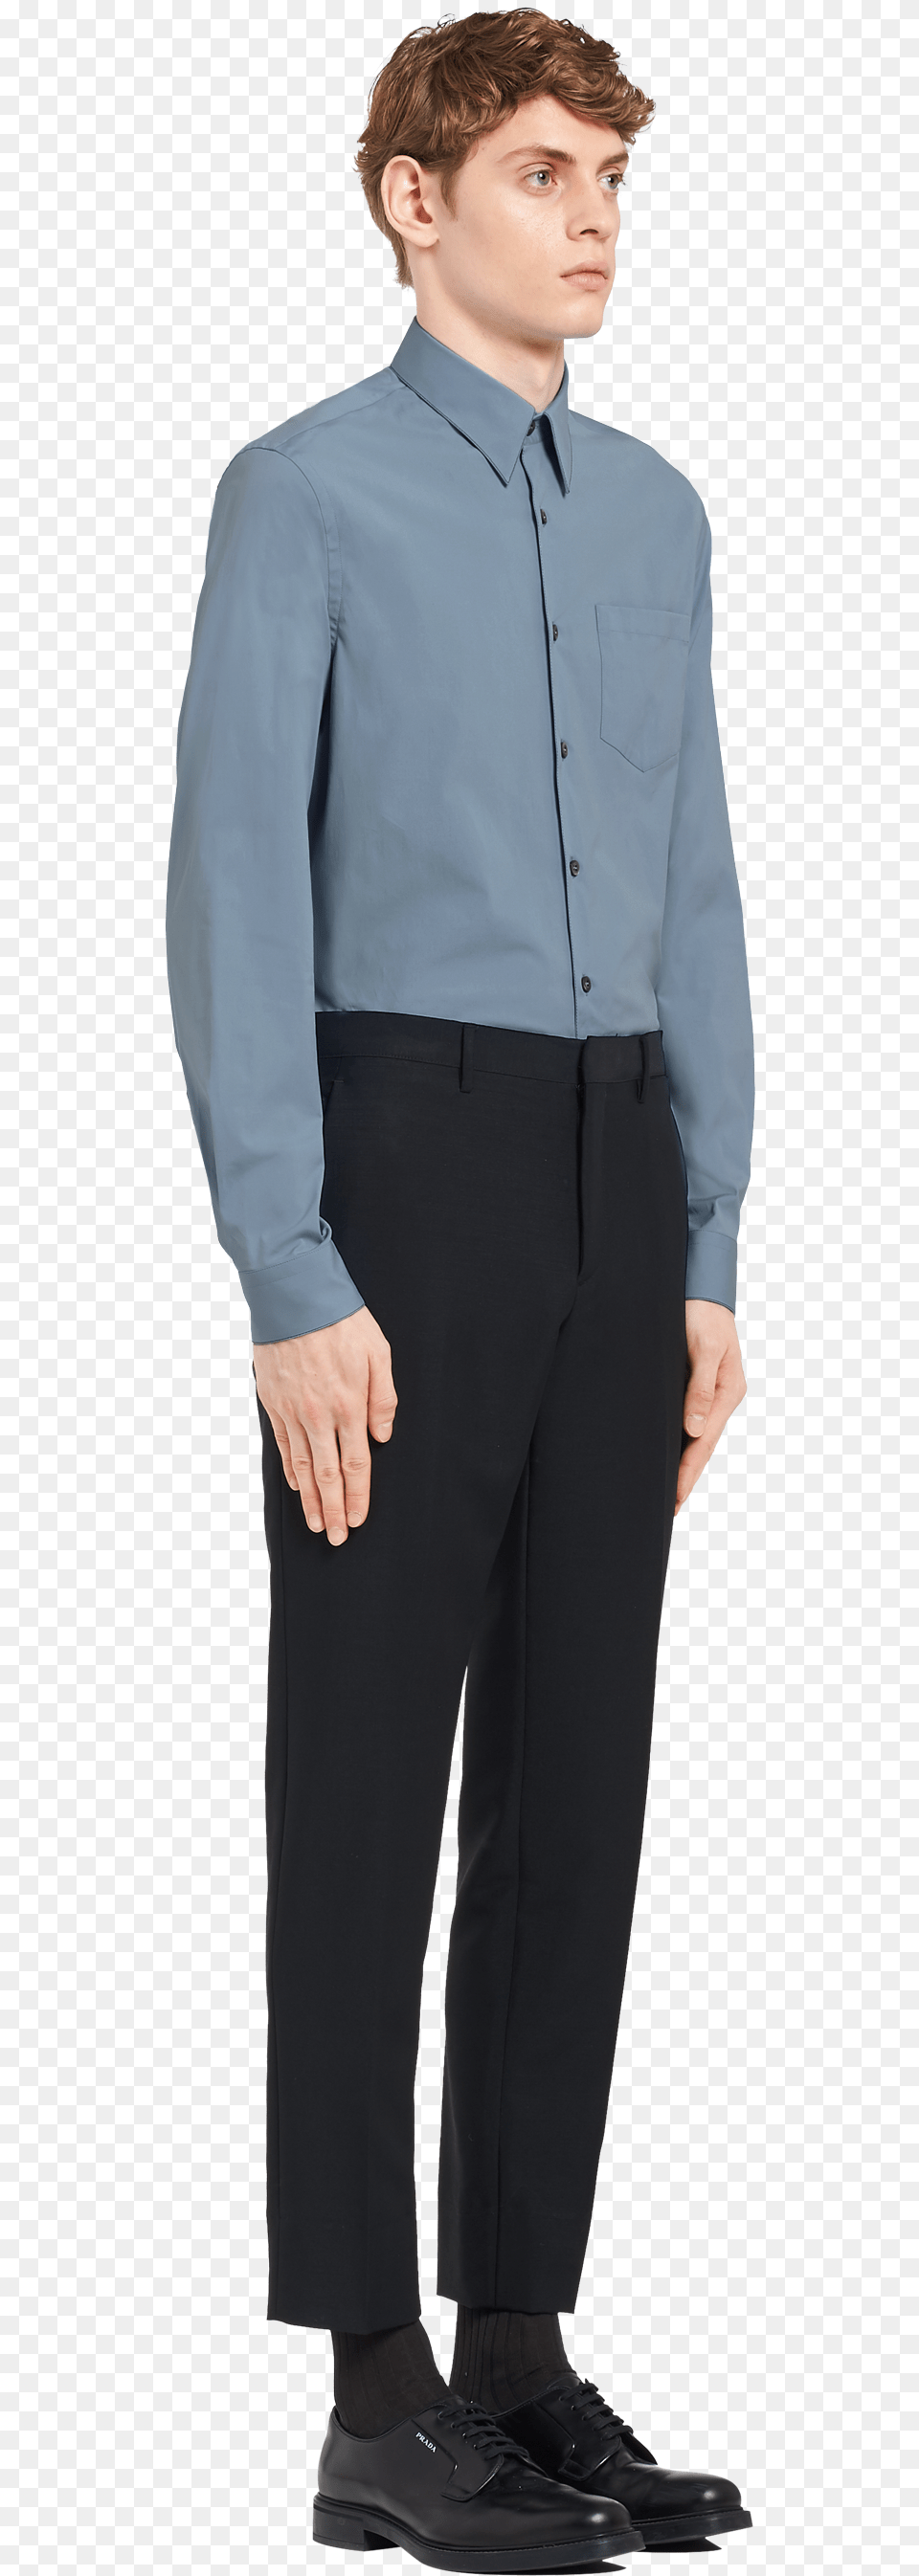 Stretch Poplin Shirt Standing, Sleeve, Pants, Suit, Long Sleeve Png Image